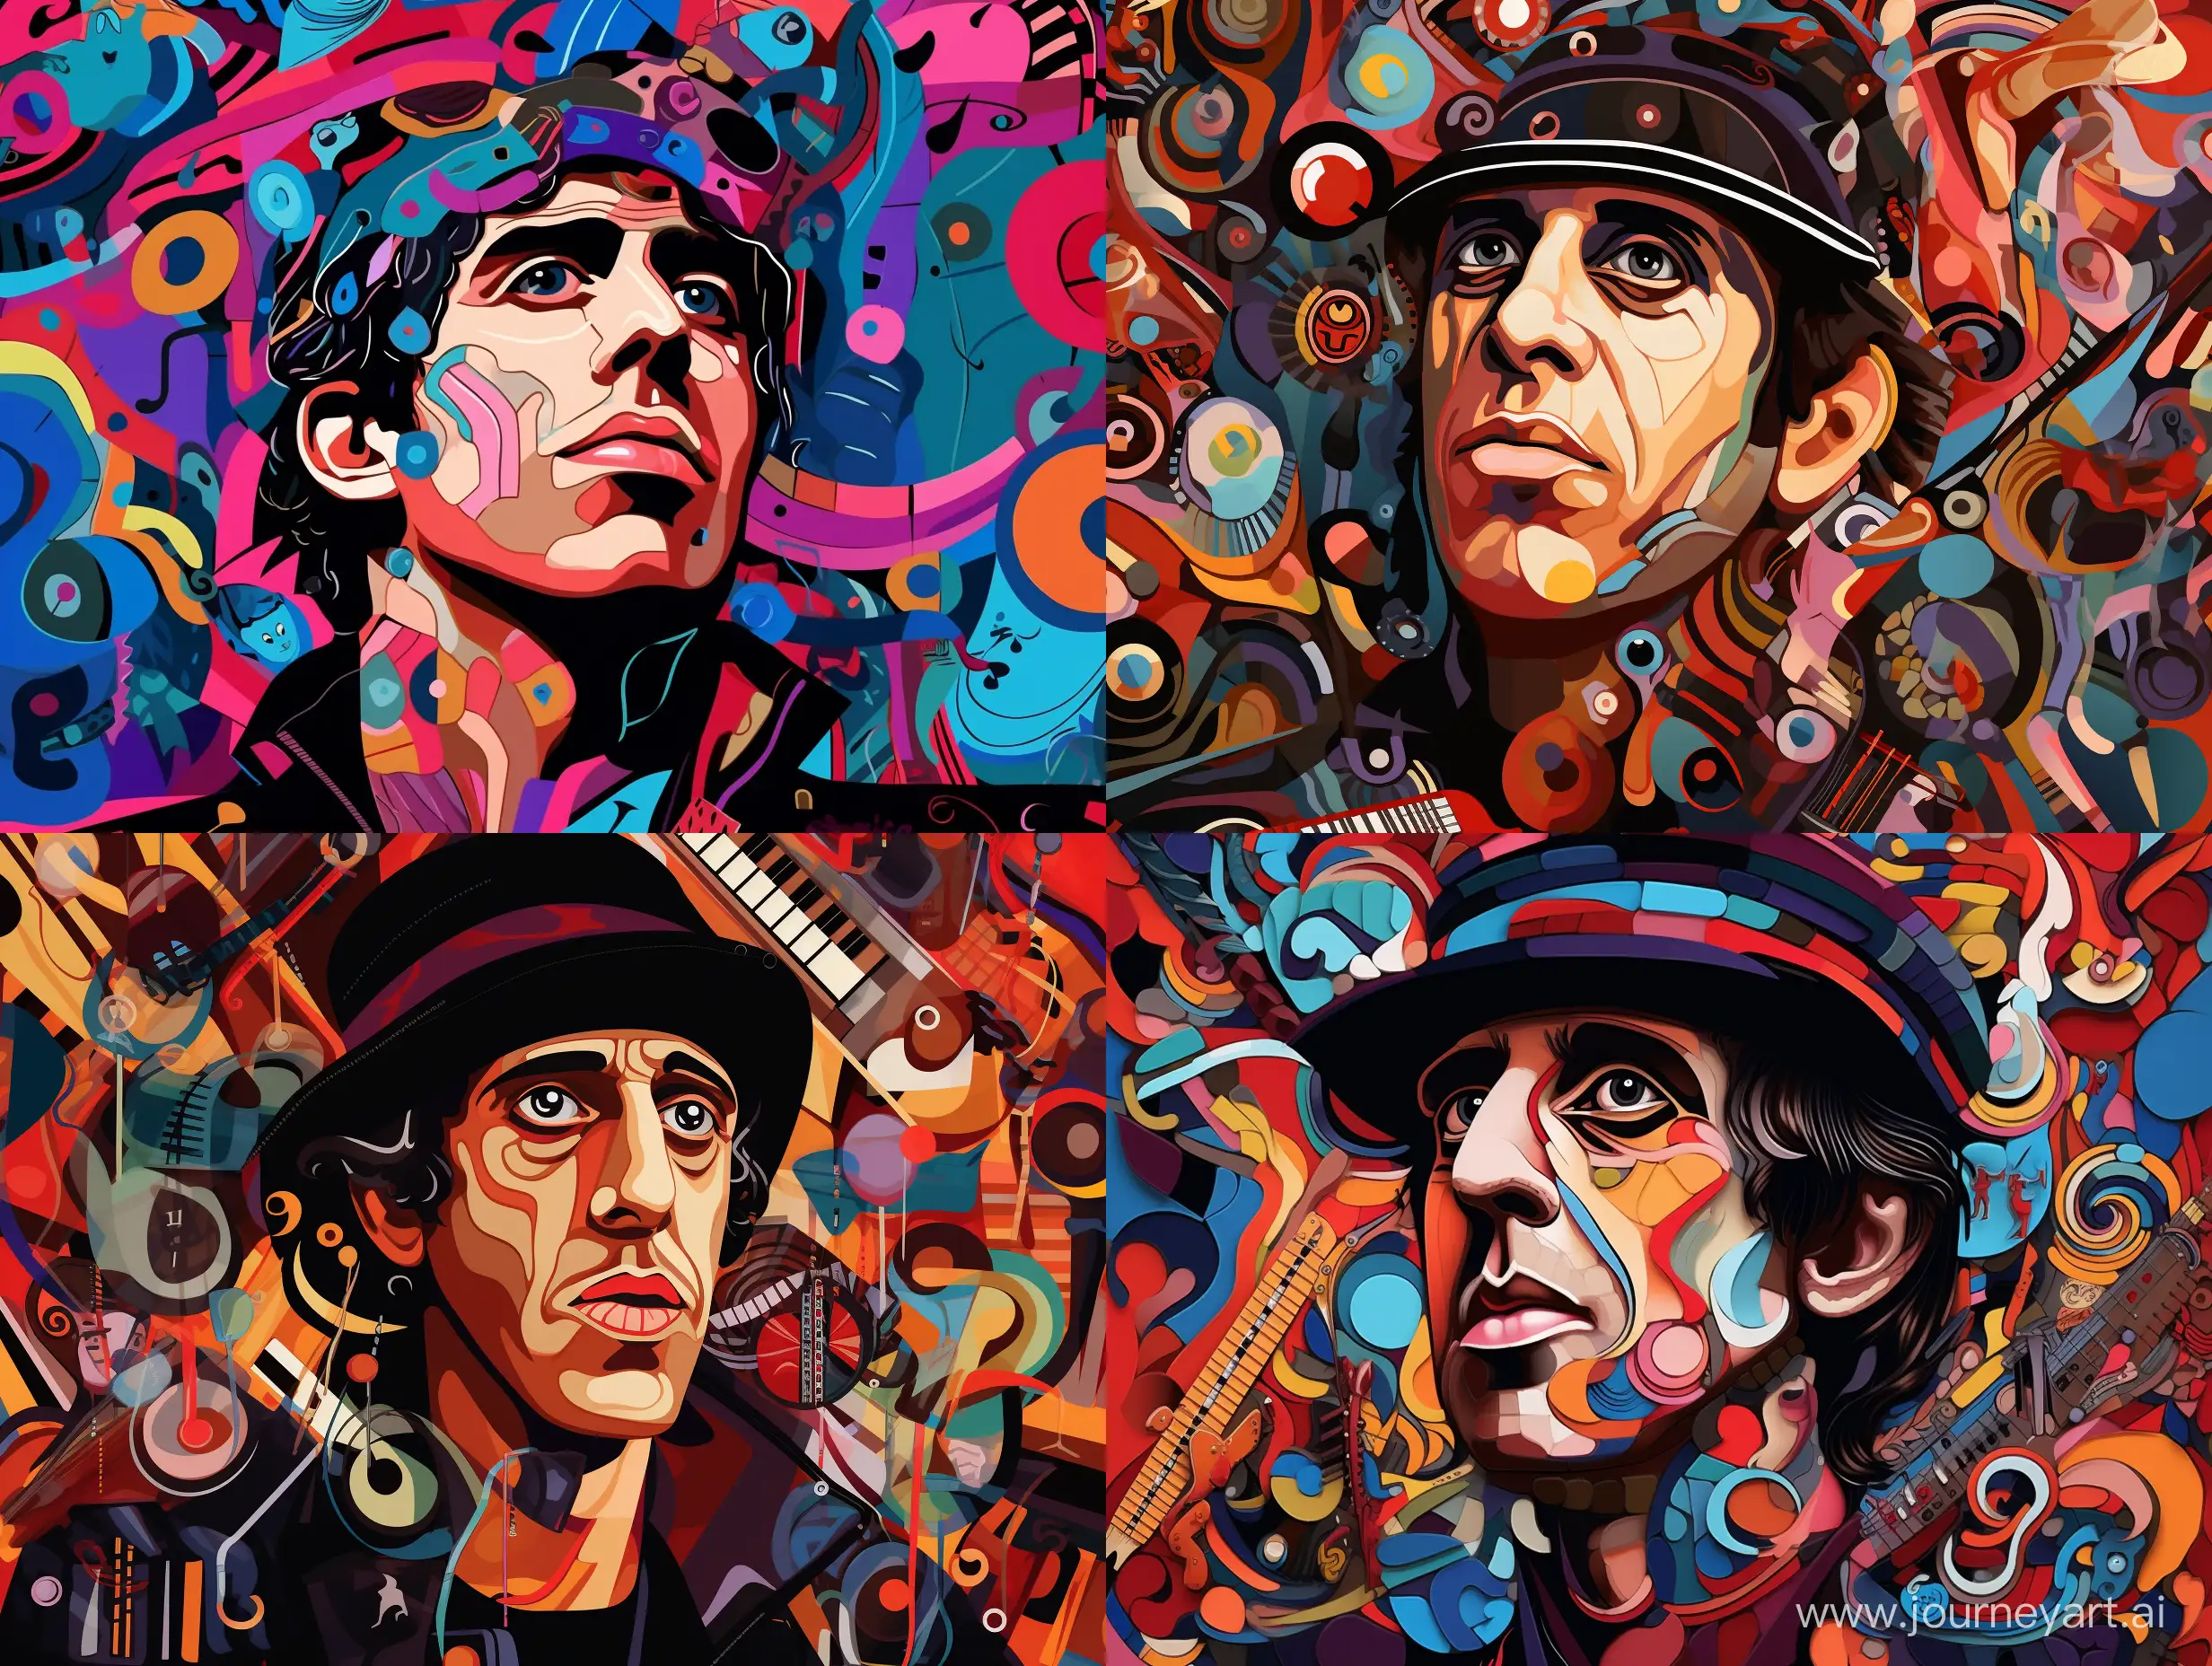 Adriano-Celentano-Caricature-in-Pop-Art-Style-with-Musical-Symbols-Background